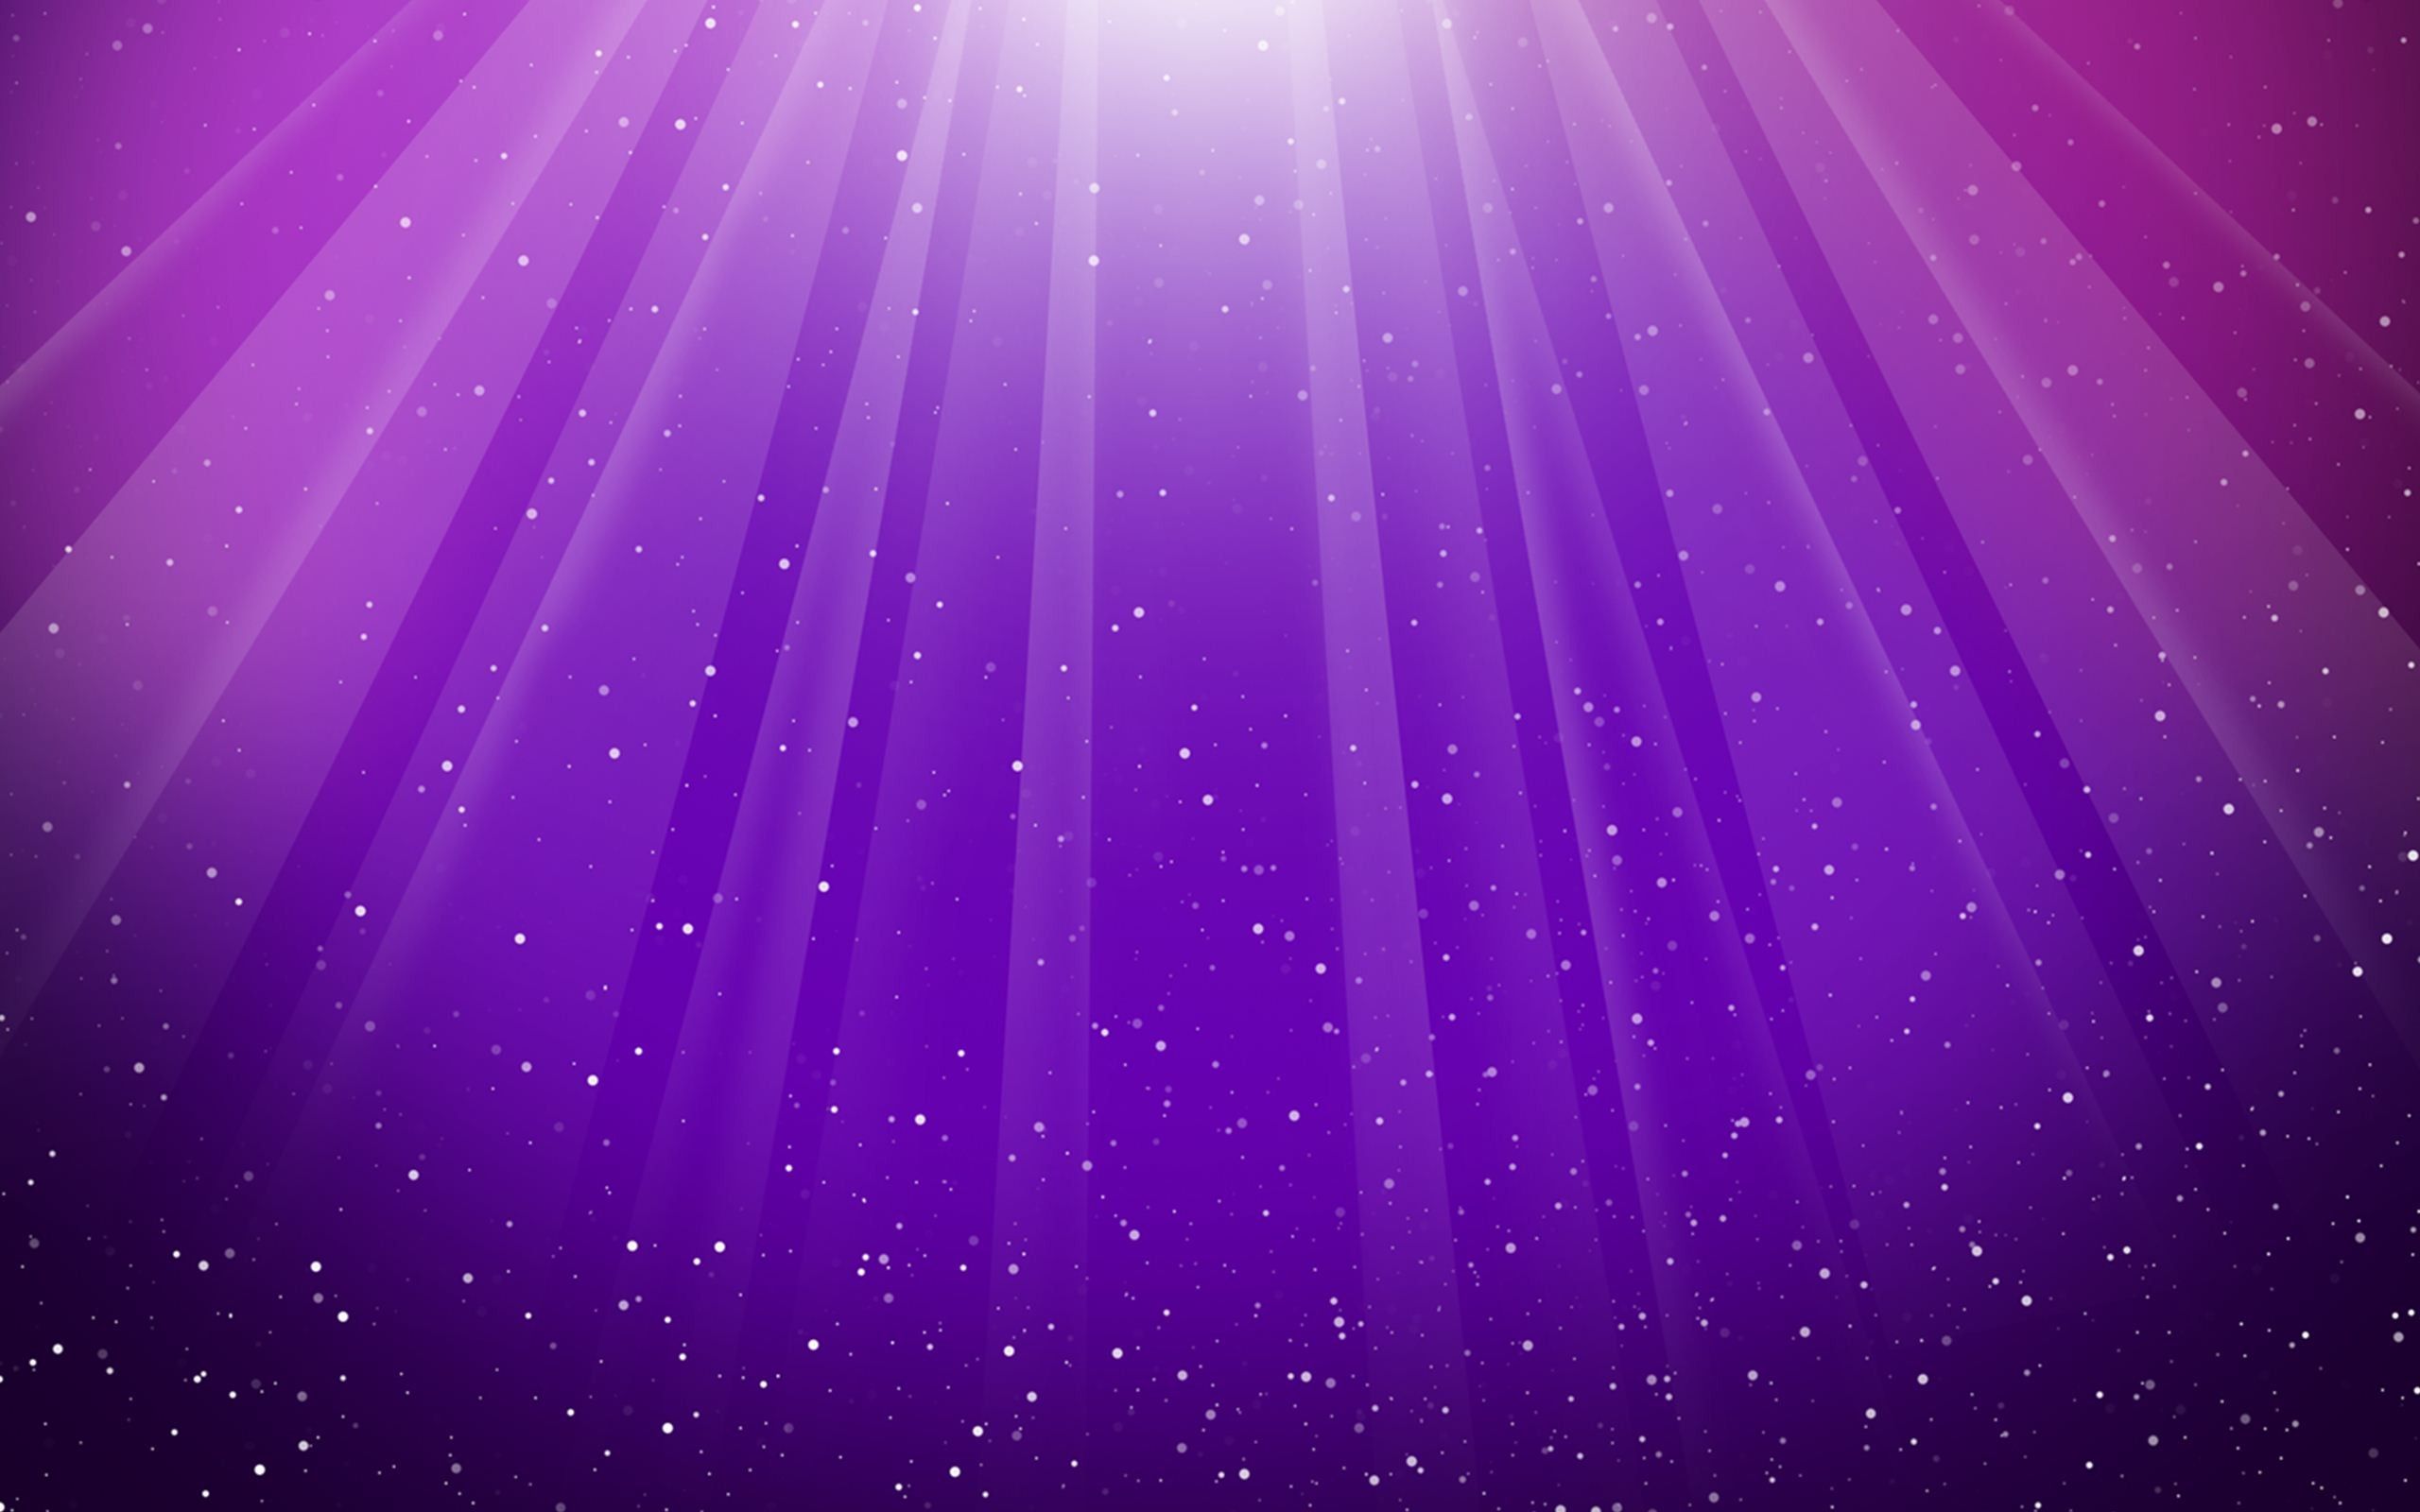 Violet Abstract Wallpapers - 4k, HD Violet Abstract Backgrounds on